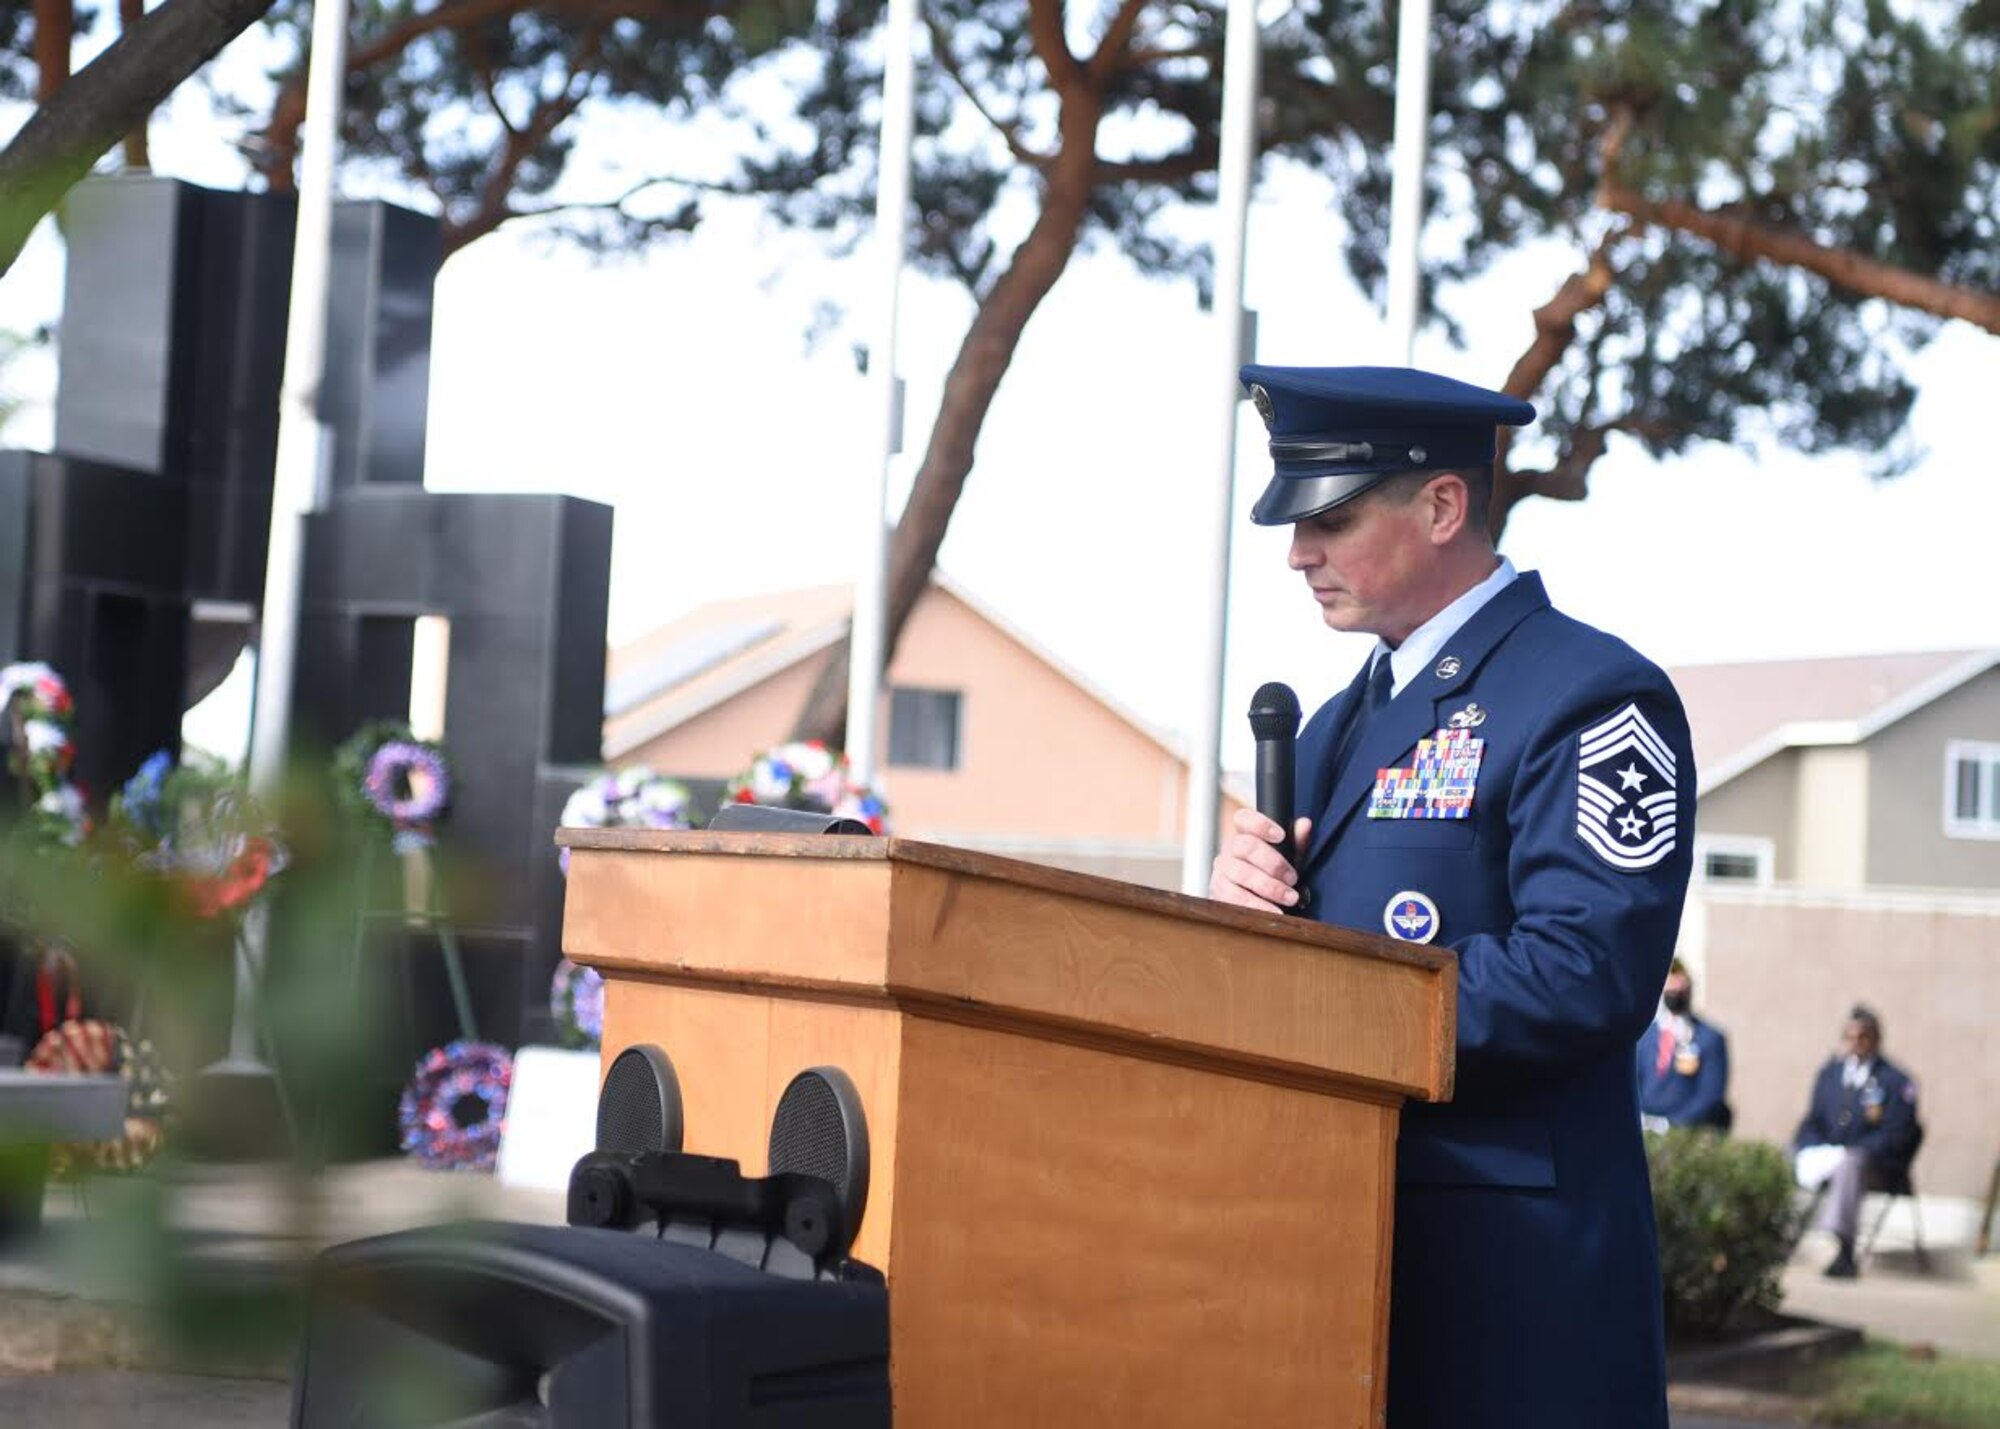 Chief Master Sgt. Jason Delucy, 30th Space Wing command chief, speaks during a Veterans Day ceremony Nov. 11, 2020, in Santa Maria, Calif. The observance honors military veterans with parades and speeches across the nation and a ceremony at the Tomb of the Unknowns at Arlington National Cemetery in Virginia. Currently, there are more than 18.2 million living veterans that have served during at least one war. (U.S. Space Force photo by Senior Airman Hanah Abercrombie)